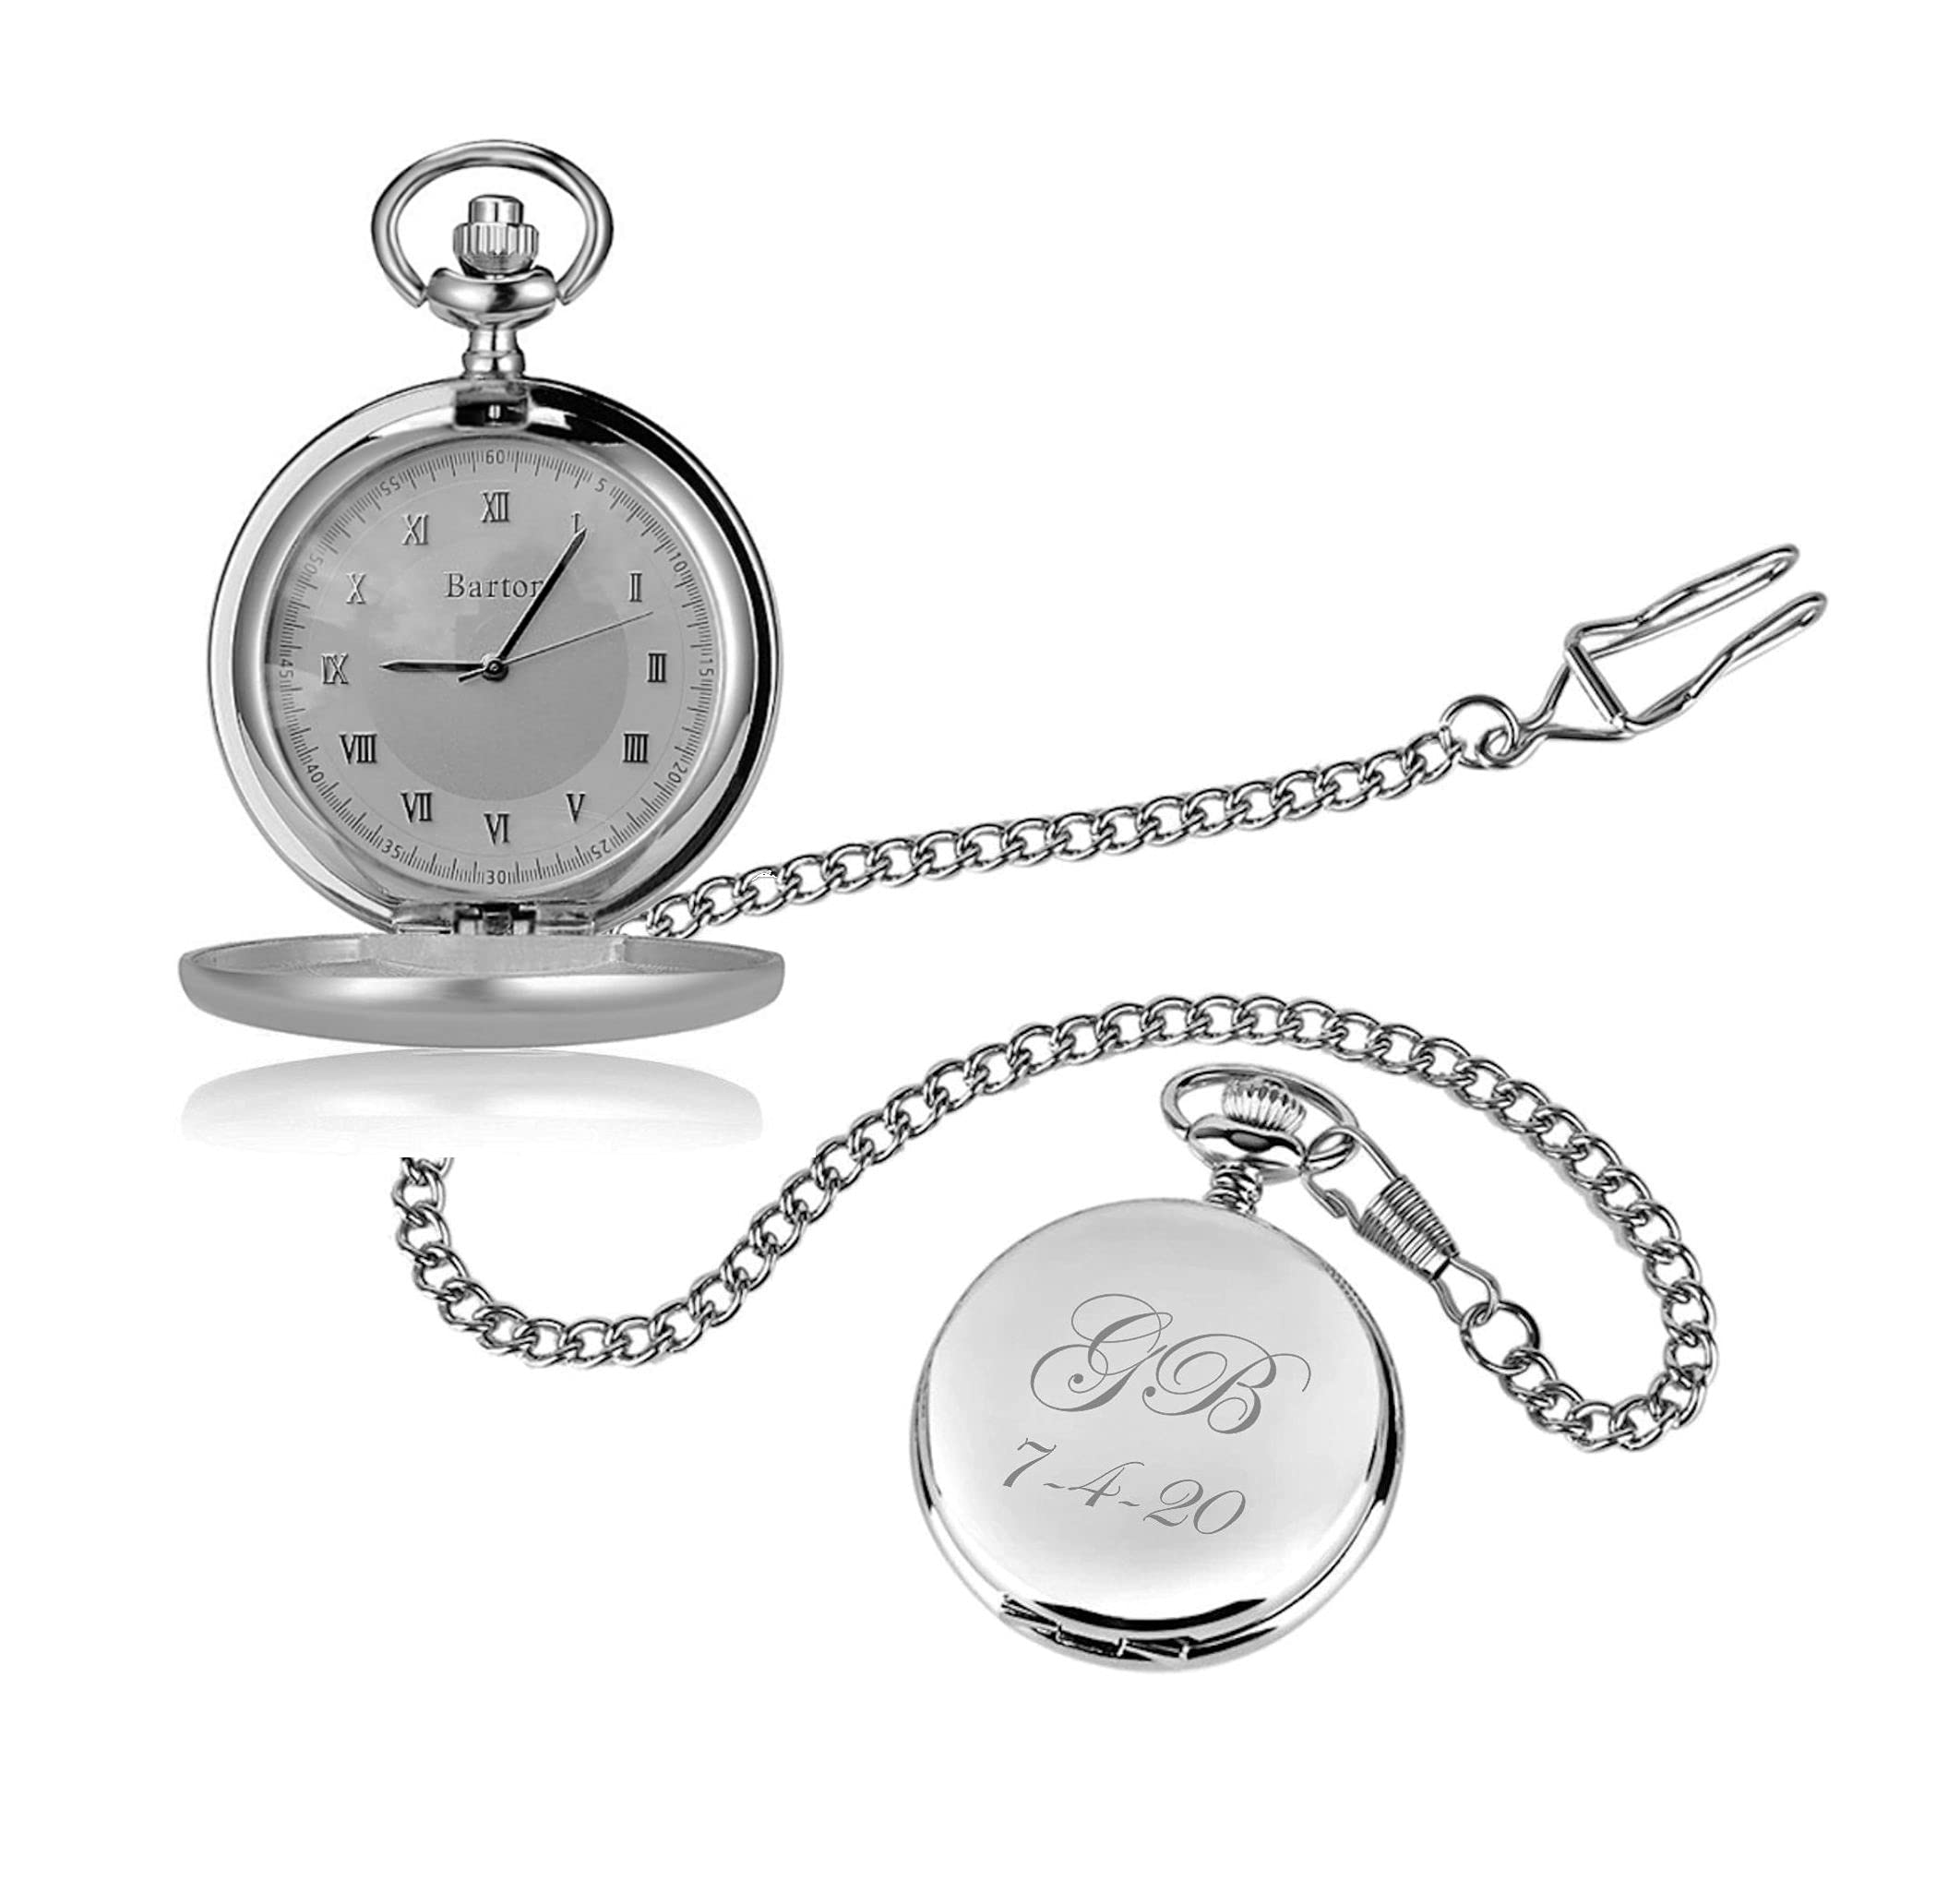 A&L Engraving Personalized Men's Stainless Steel Pocket Watch with Glass Cover and Chain Custom Engraved Free - Ships from USA,silver(PW-10)